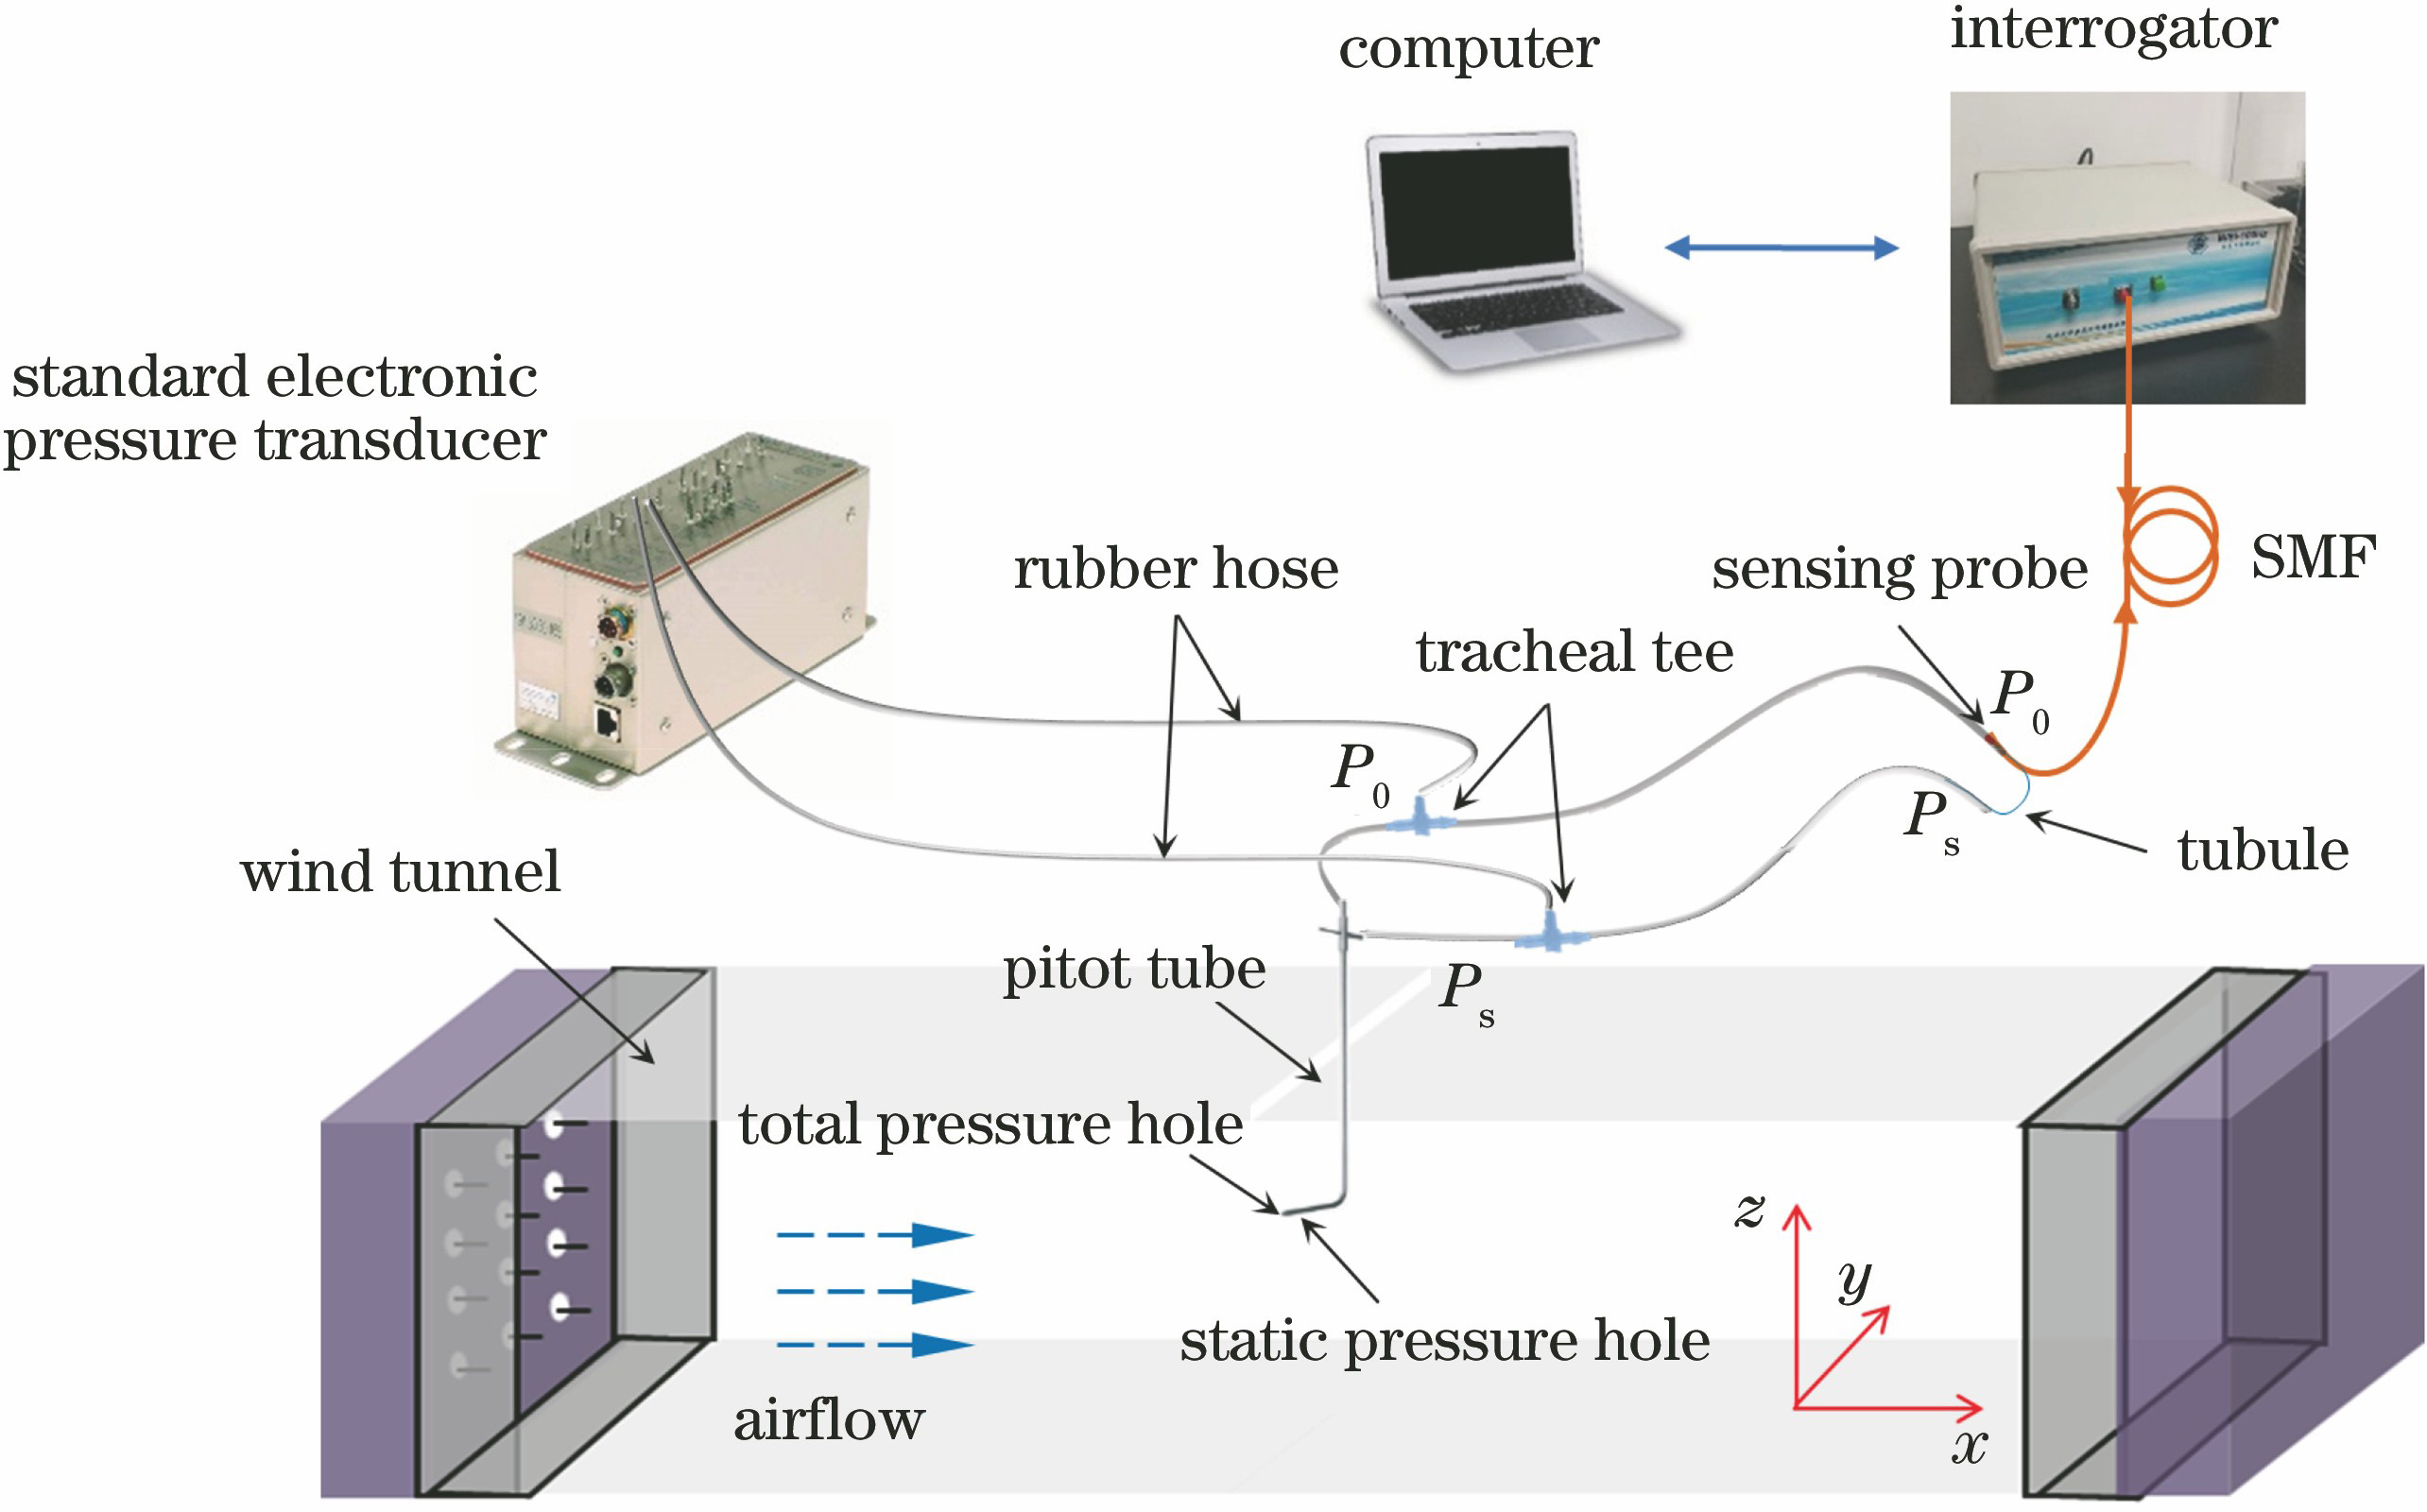 Experimental setup for airflow velocity measurement in a wind tunnel